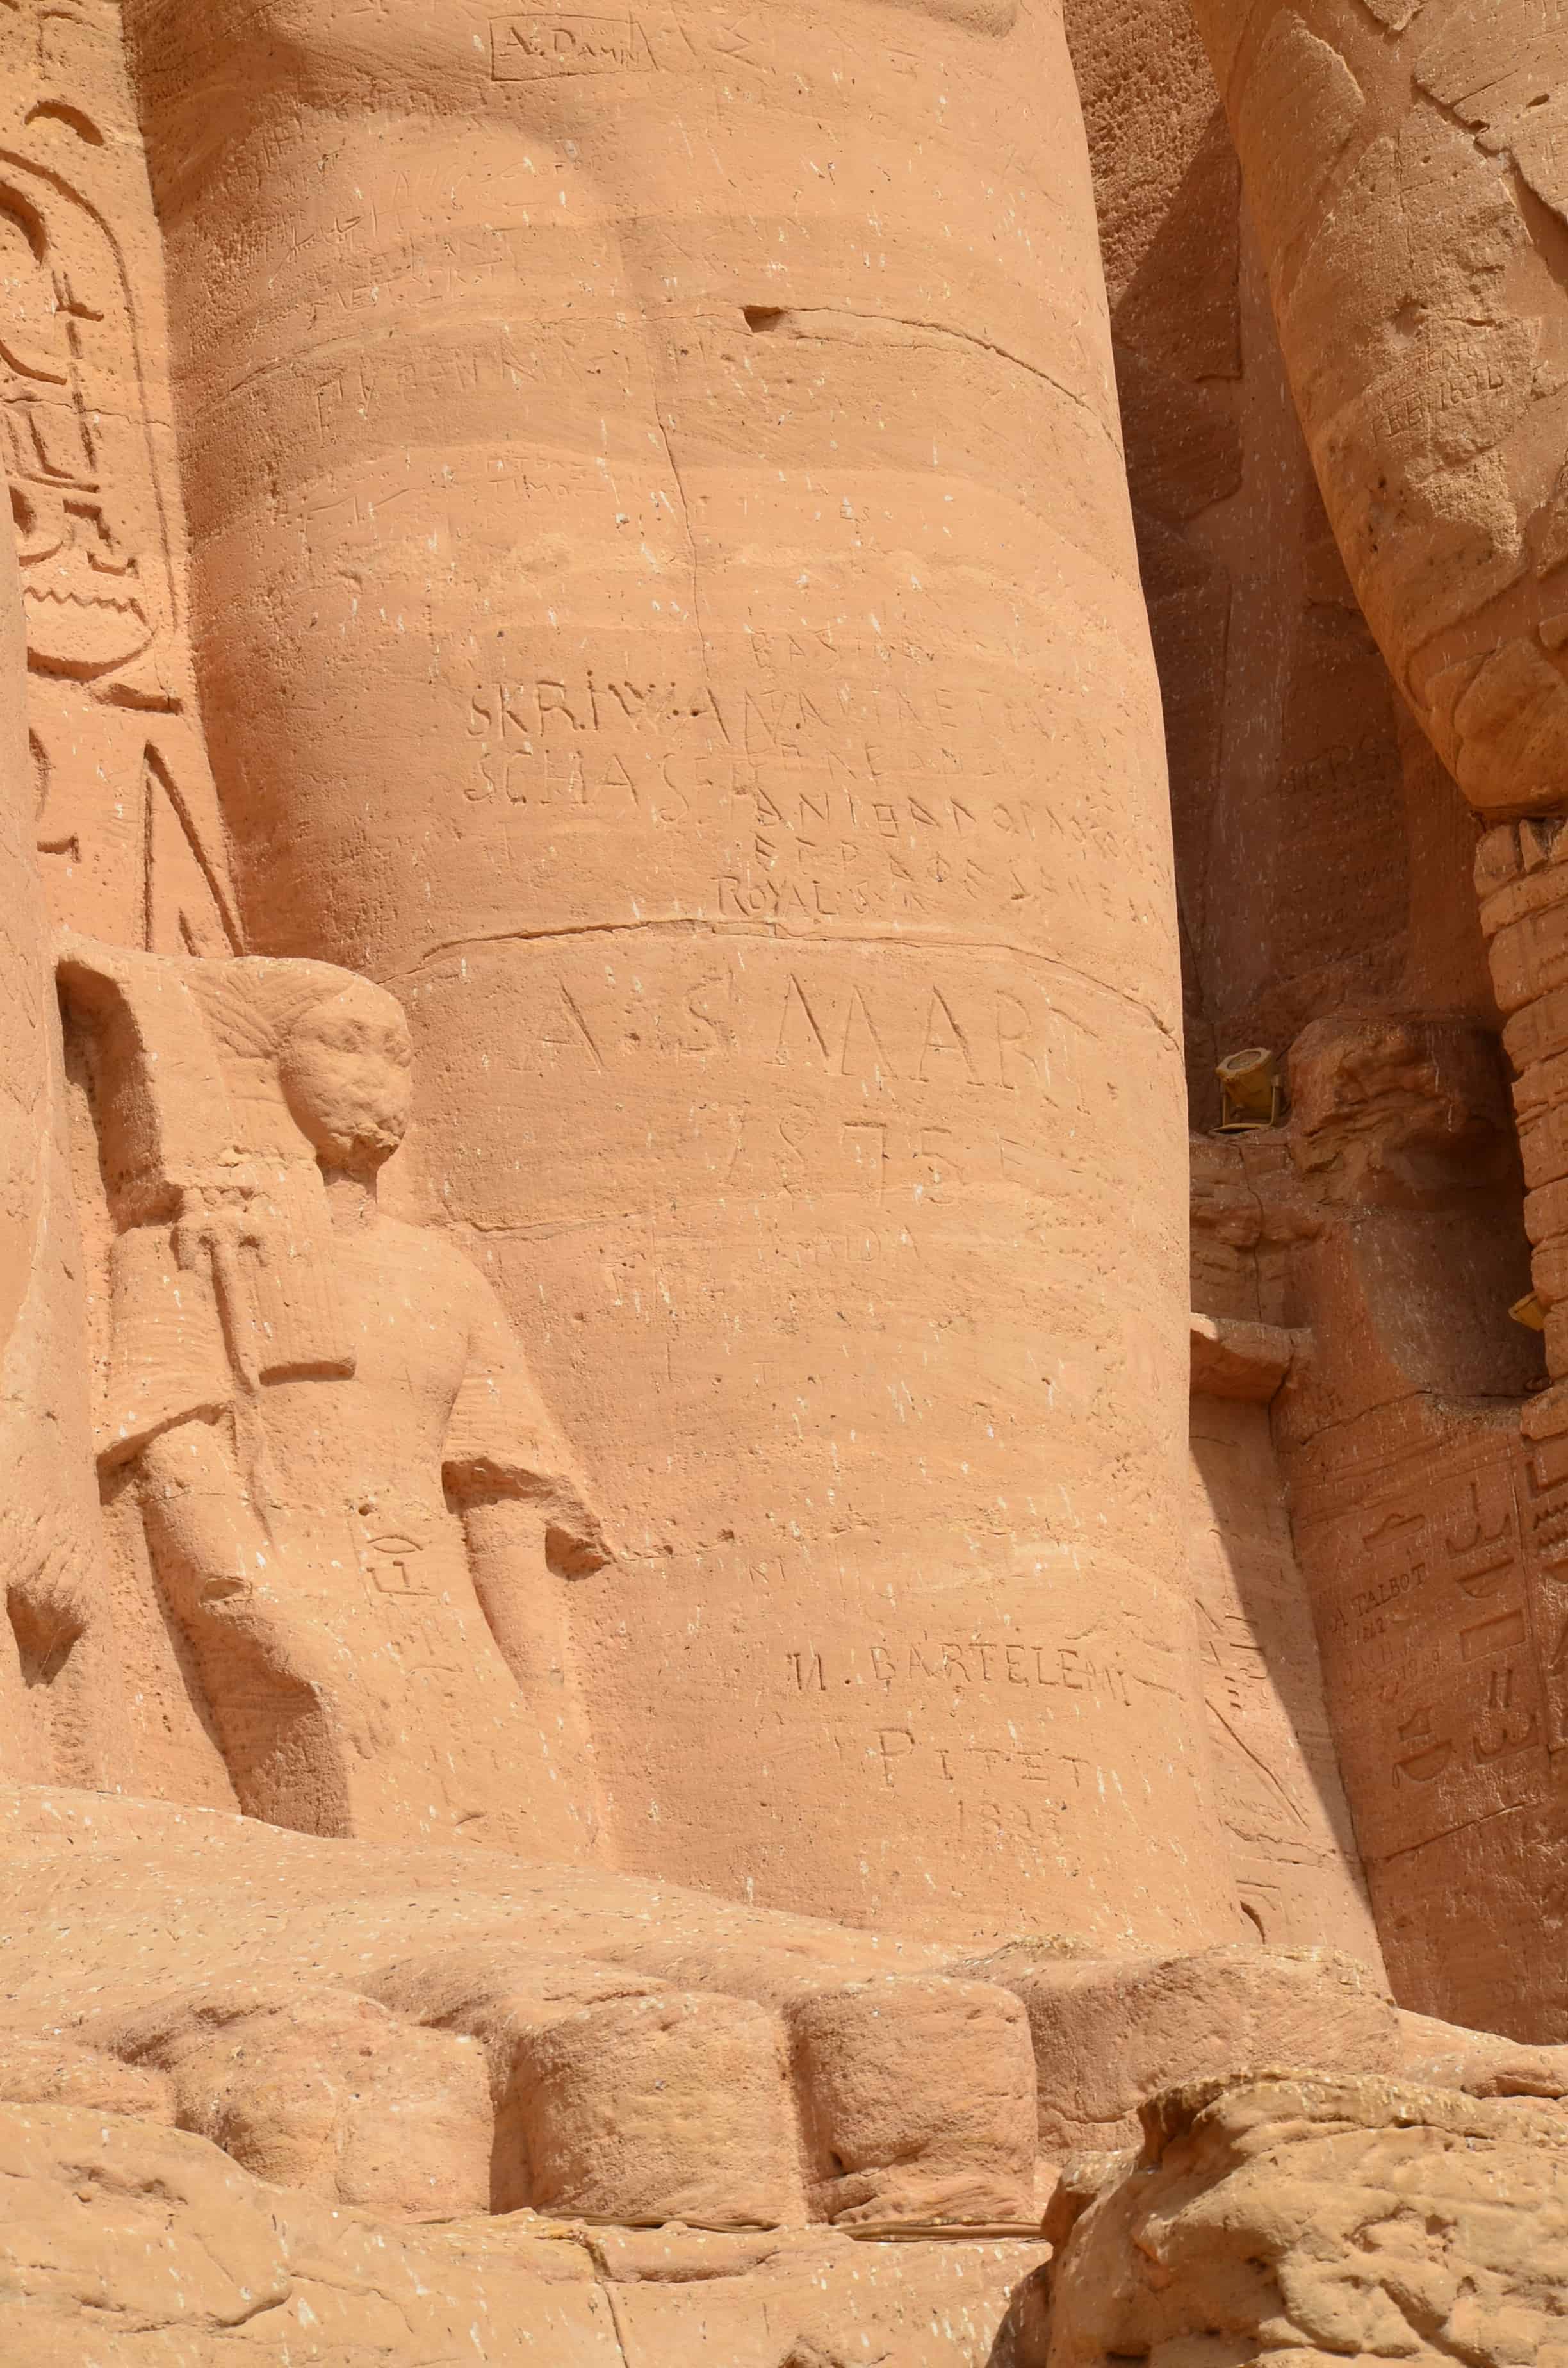 Graffiti left by travelers at the Temple of Ramses II at Abu Simbel, Egypt